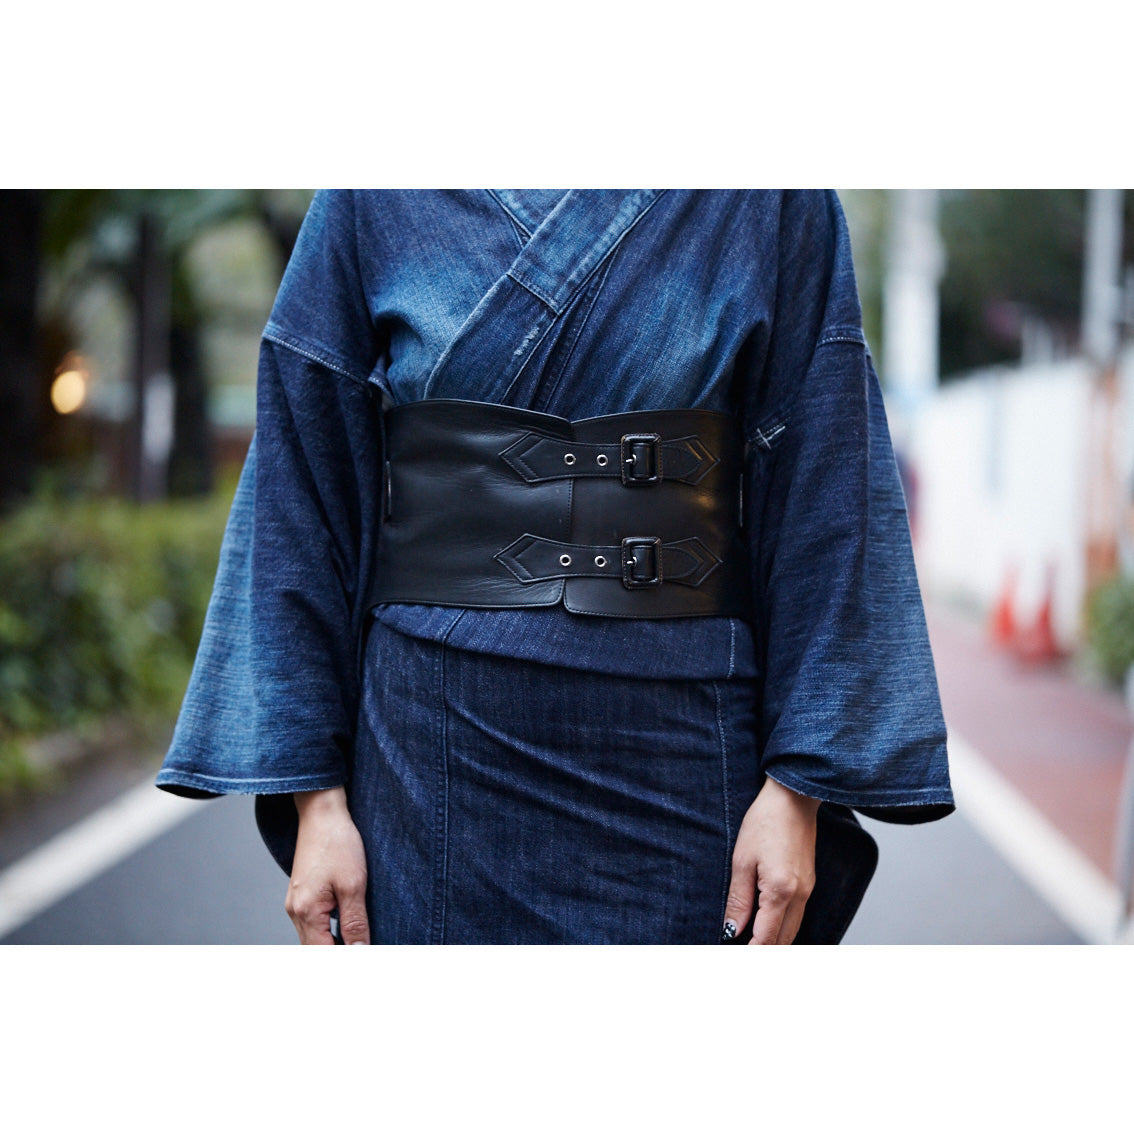 [Immediate delivery available] Obi belt leather "black"